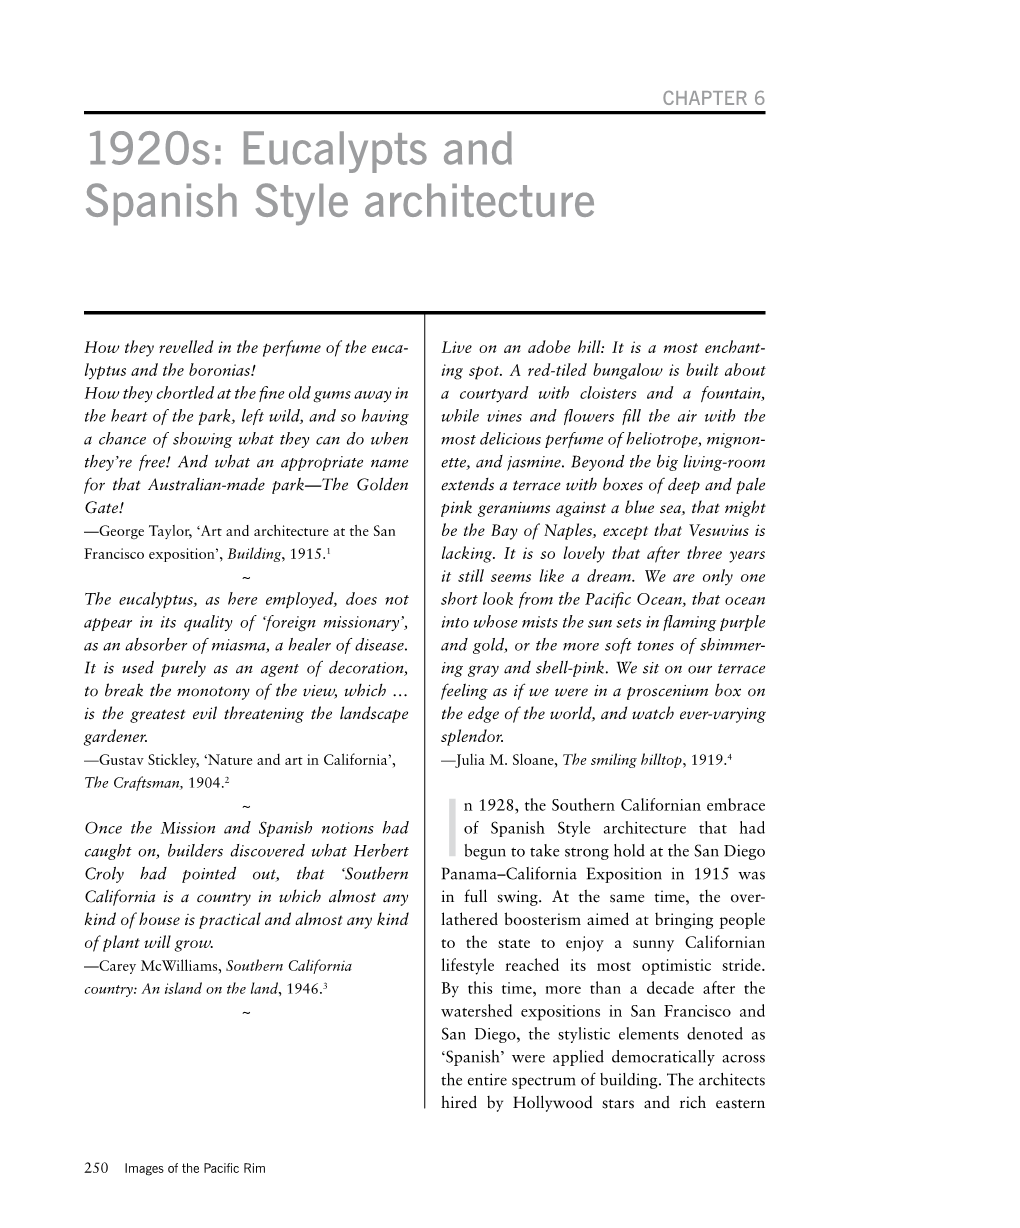 Chapter 6: 1920S: Eucalypts and Spanish Style Architecture